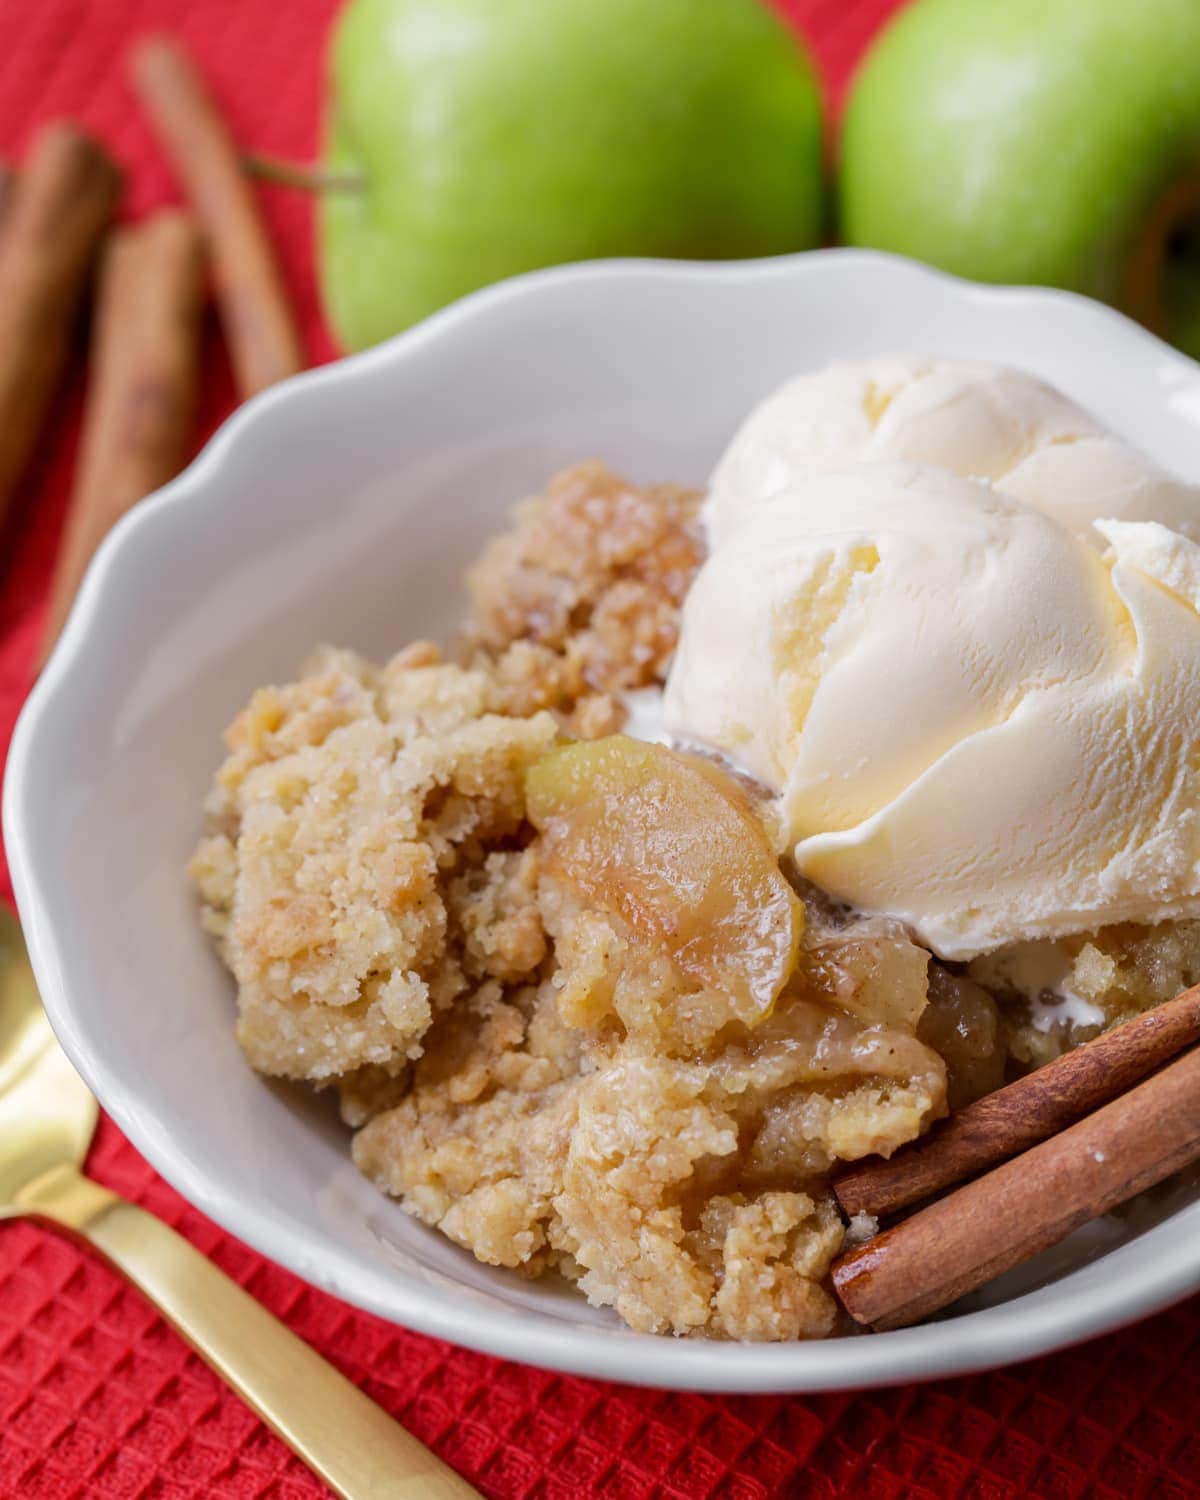 Blueberry cobbler - a bowl of apple cobbler topped with vanilla ice cream.